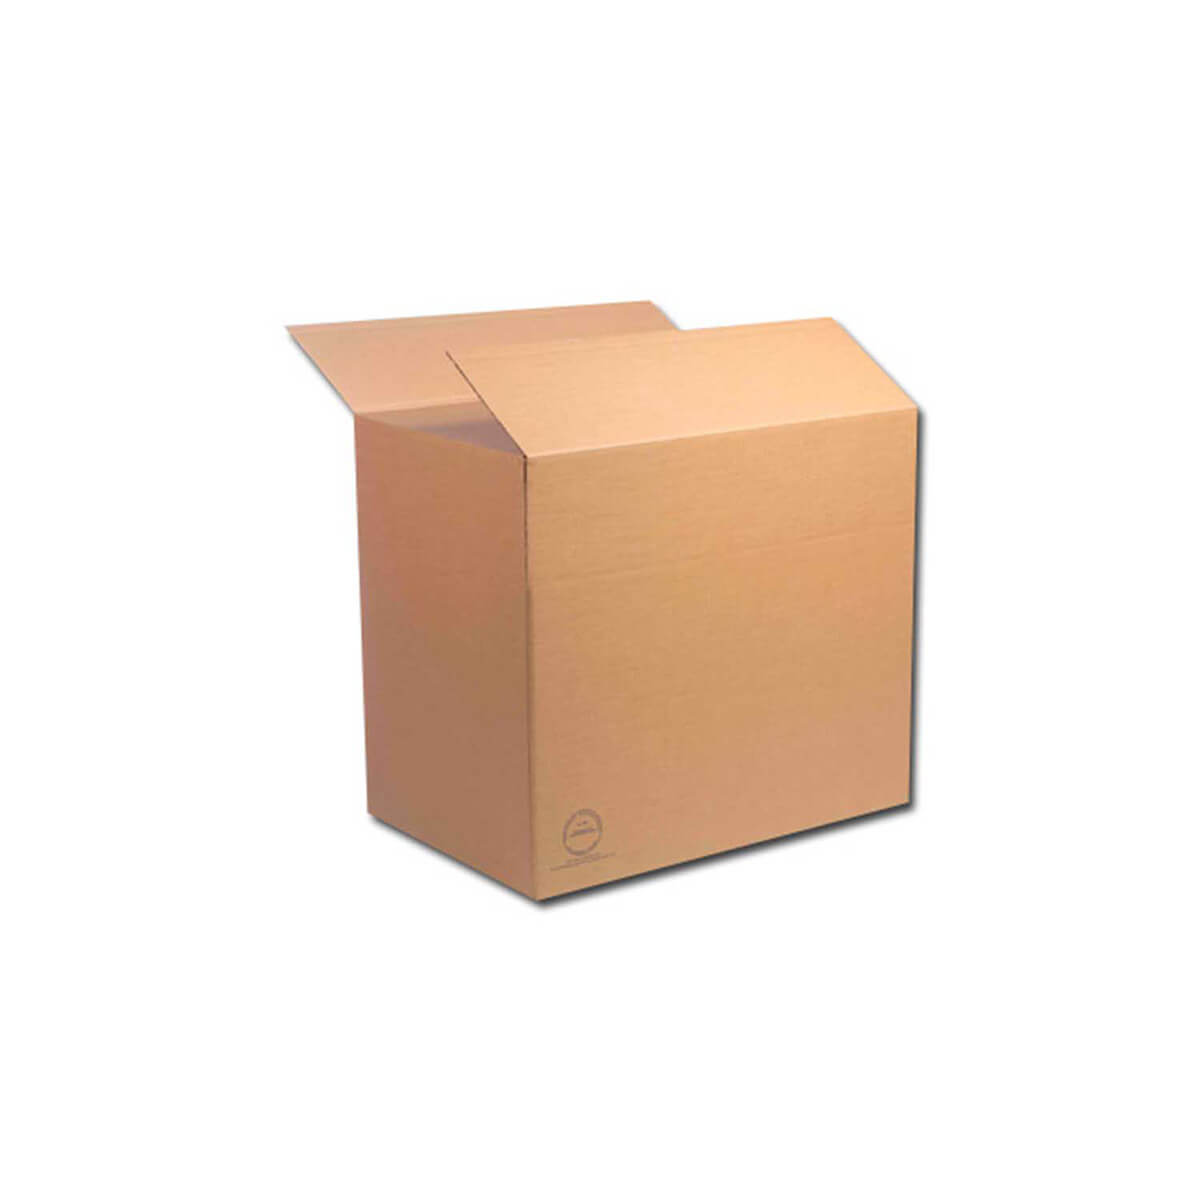 Double wall cardboard container 1180 x 780 x 750 mm